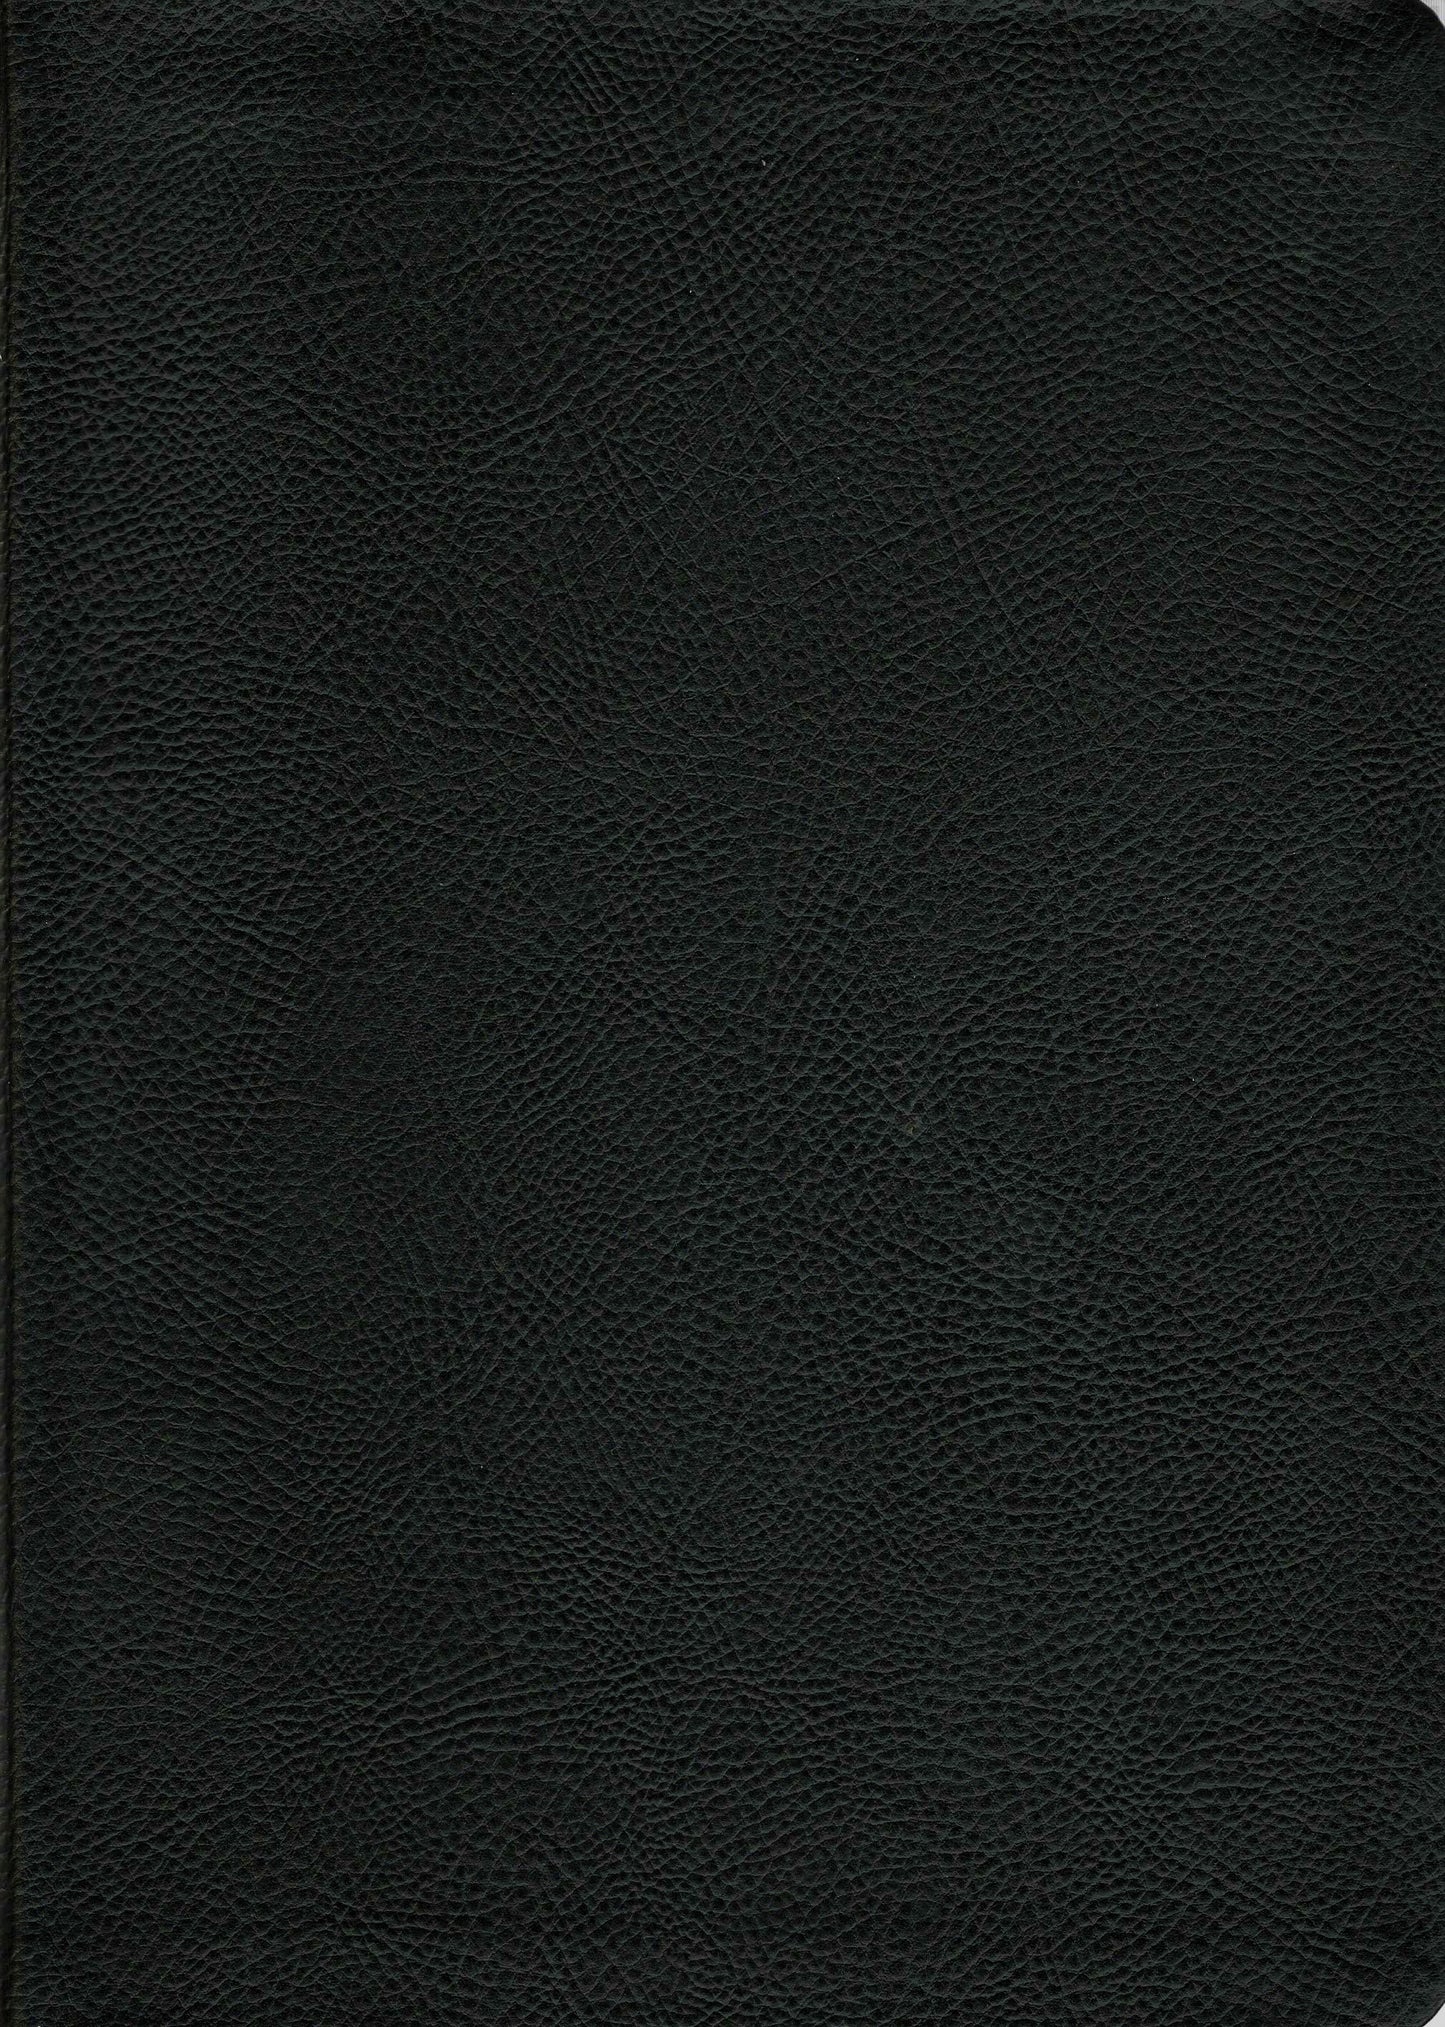 Tyndale NKJV® House Publishers Life Application® Study Bible - Third Edition - Bonded Leather (Black)